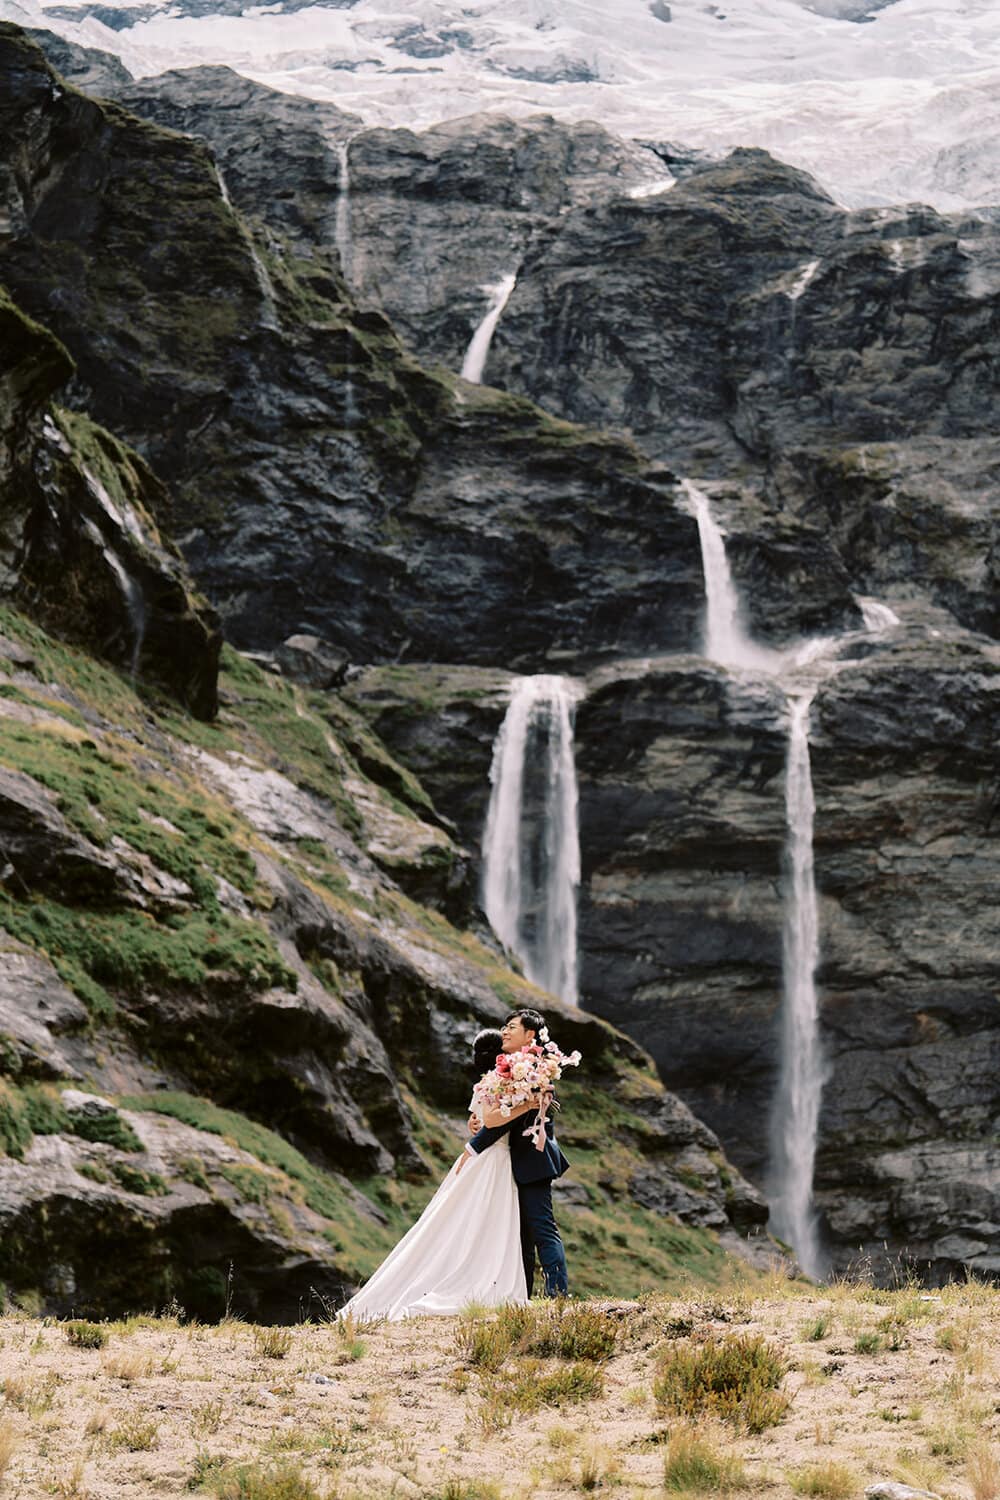 Queenstown New Zealand Heli Wedding Elopement Photographer クイーンズタウン　ニュージーランド　エロープメント 結婚式 | A couple embracing in front of a cascading waterfall on a mountainous terrain, captured by YURI, the Queenstown Wedding Photographer.